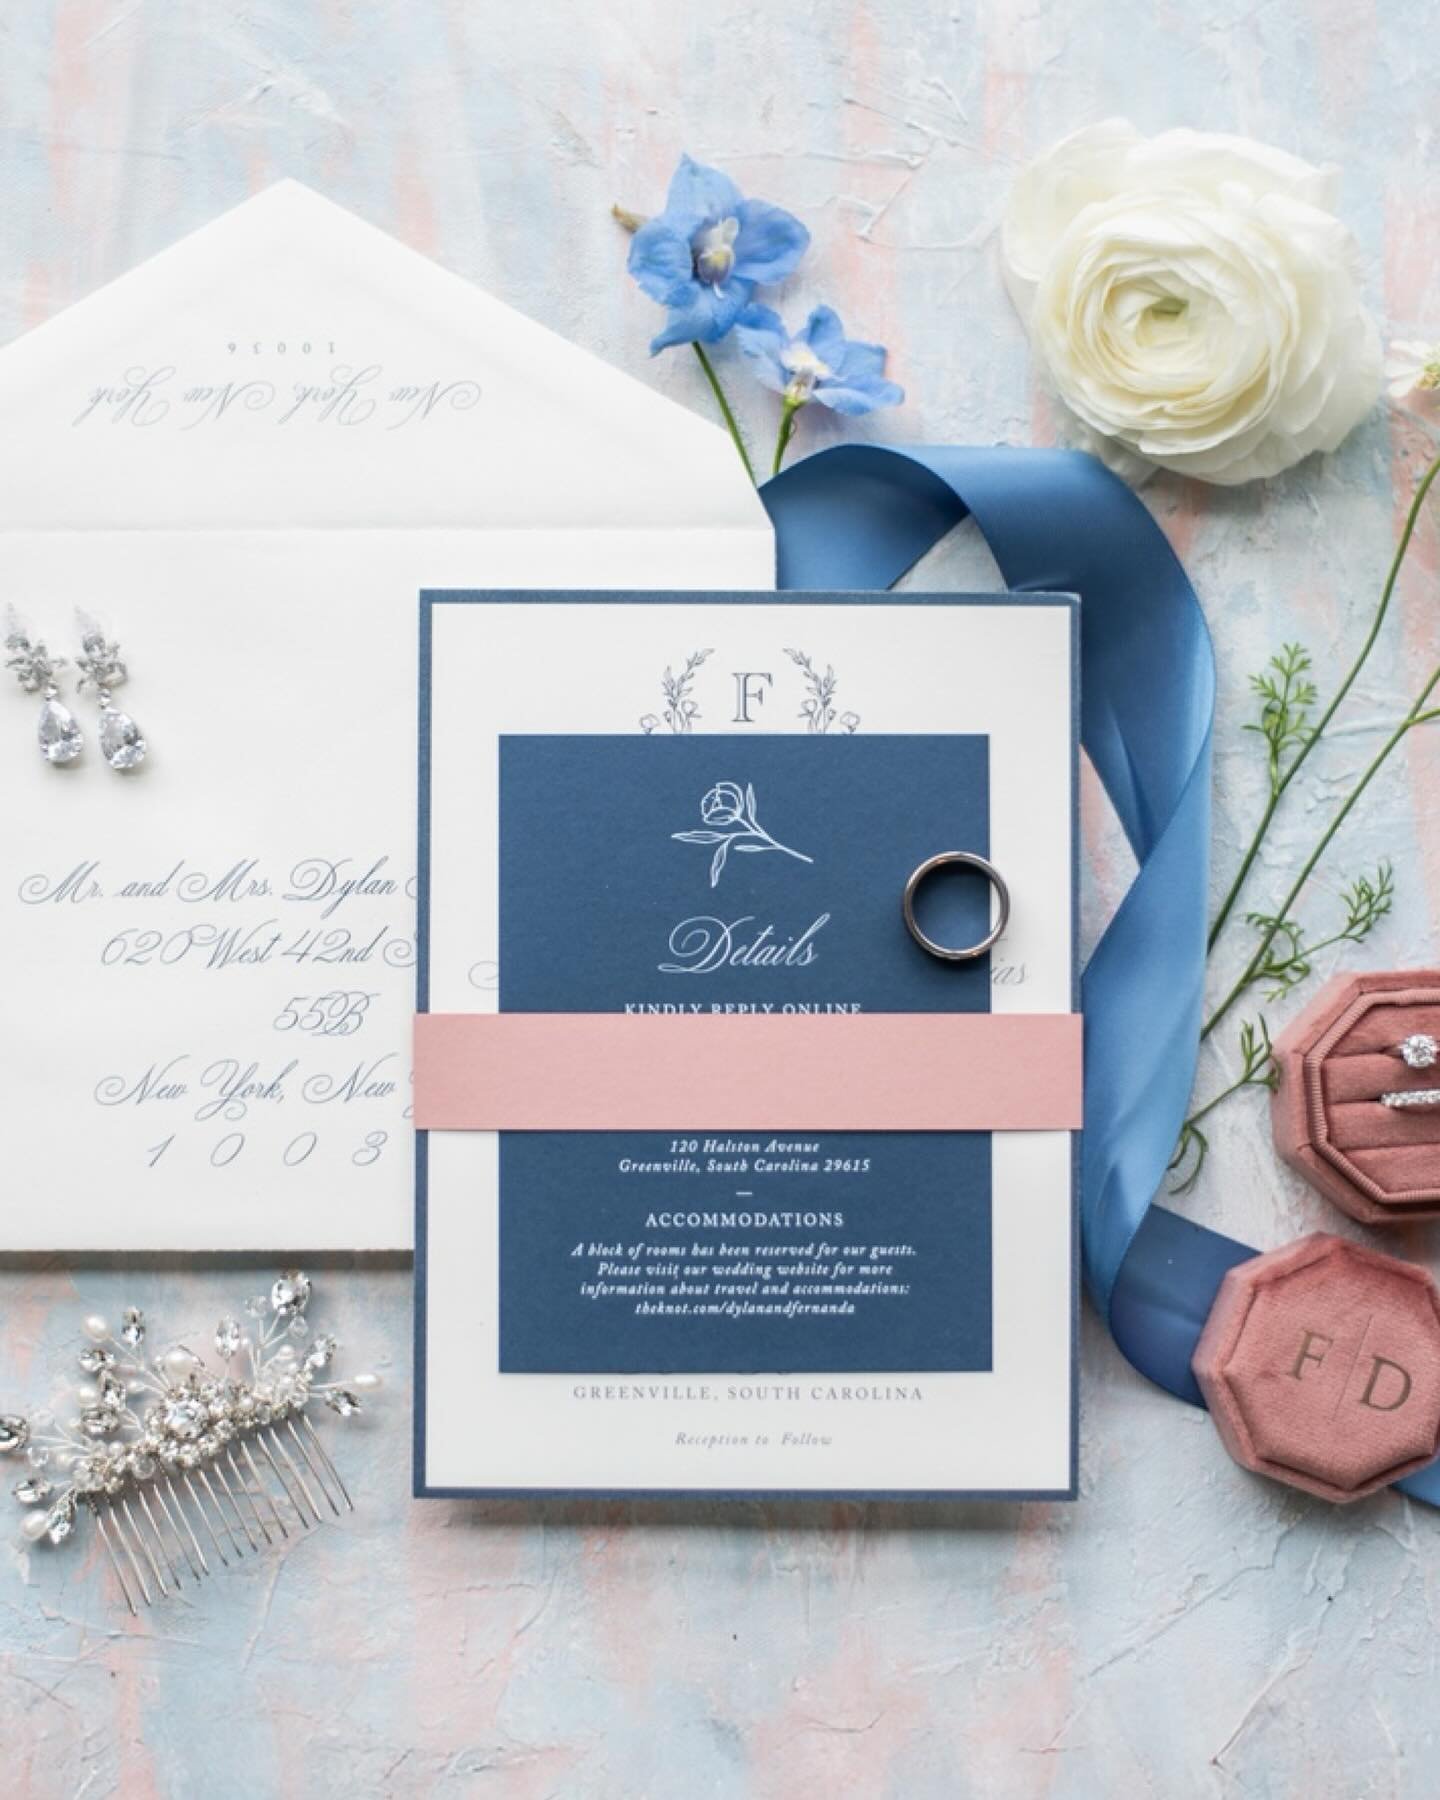 Here for all the little details you need! From save the dates, to the perfect dance floor touch, we can help you with it all so you can focus on actually *enjoying* planning your dream event! 

Planner: @kelizabethcoevents 
Photographer: @rainsfordph